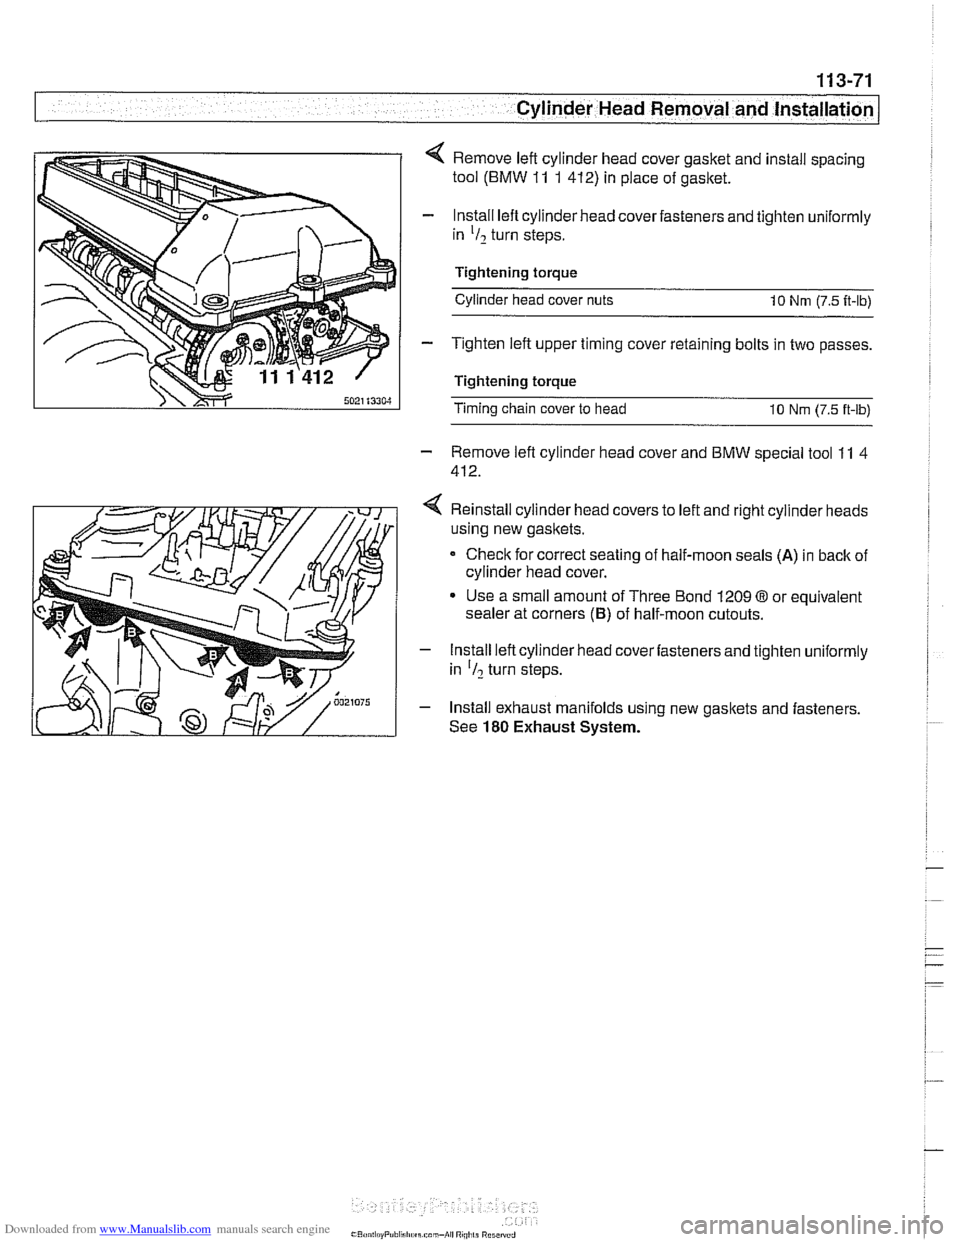 BMW 530i 1997 E39 Owners Guide Downloaded from www.Manualslib.com manuals search engine 
. ." . . 
I - Cylinder Head Removal - and instard -- 
4 Remove left cylinder  head cover gasket  and install  spacing 
tool  (BMW 
11 1 412)  